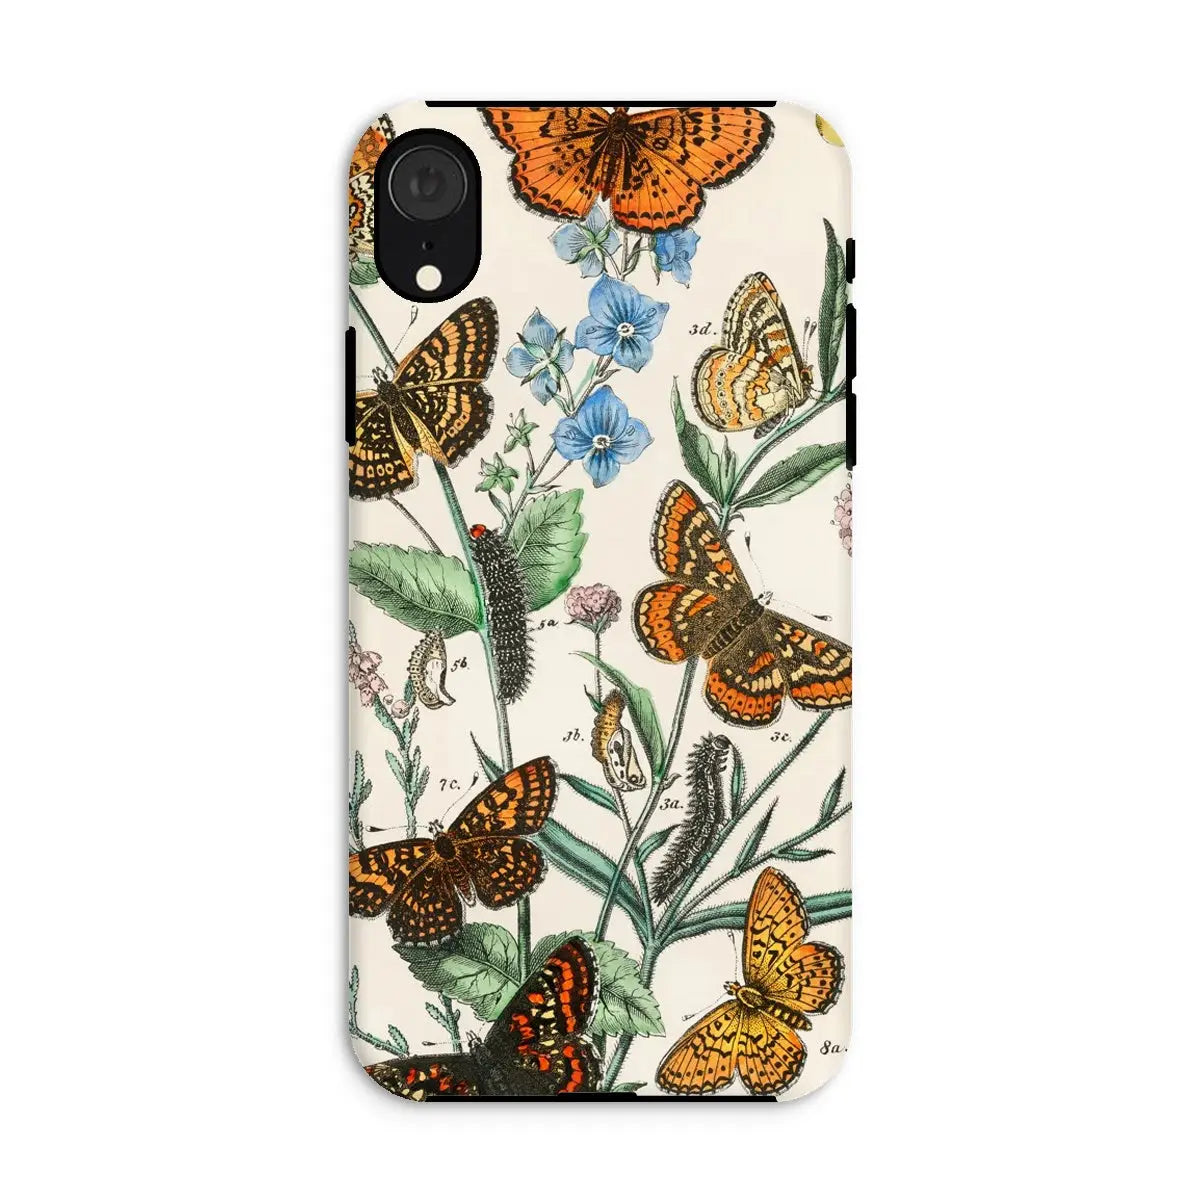 European Butterflies And Moths 2 Art Phone Case - William Forsell Kirby - Iphone Xr / Matte - Mobile Phone Cases